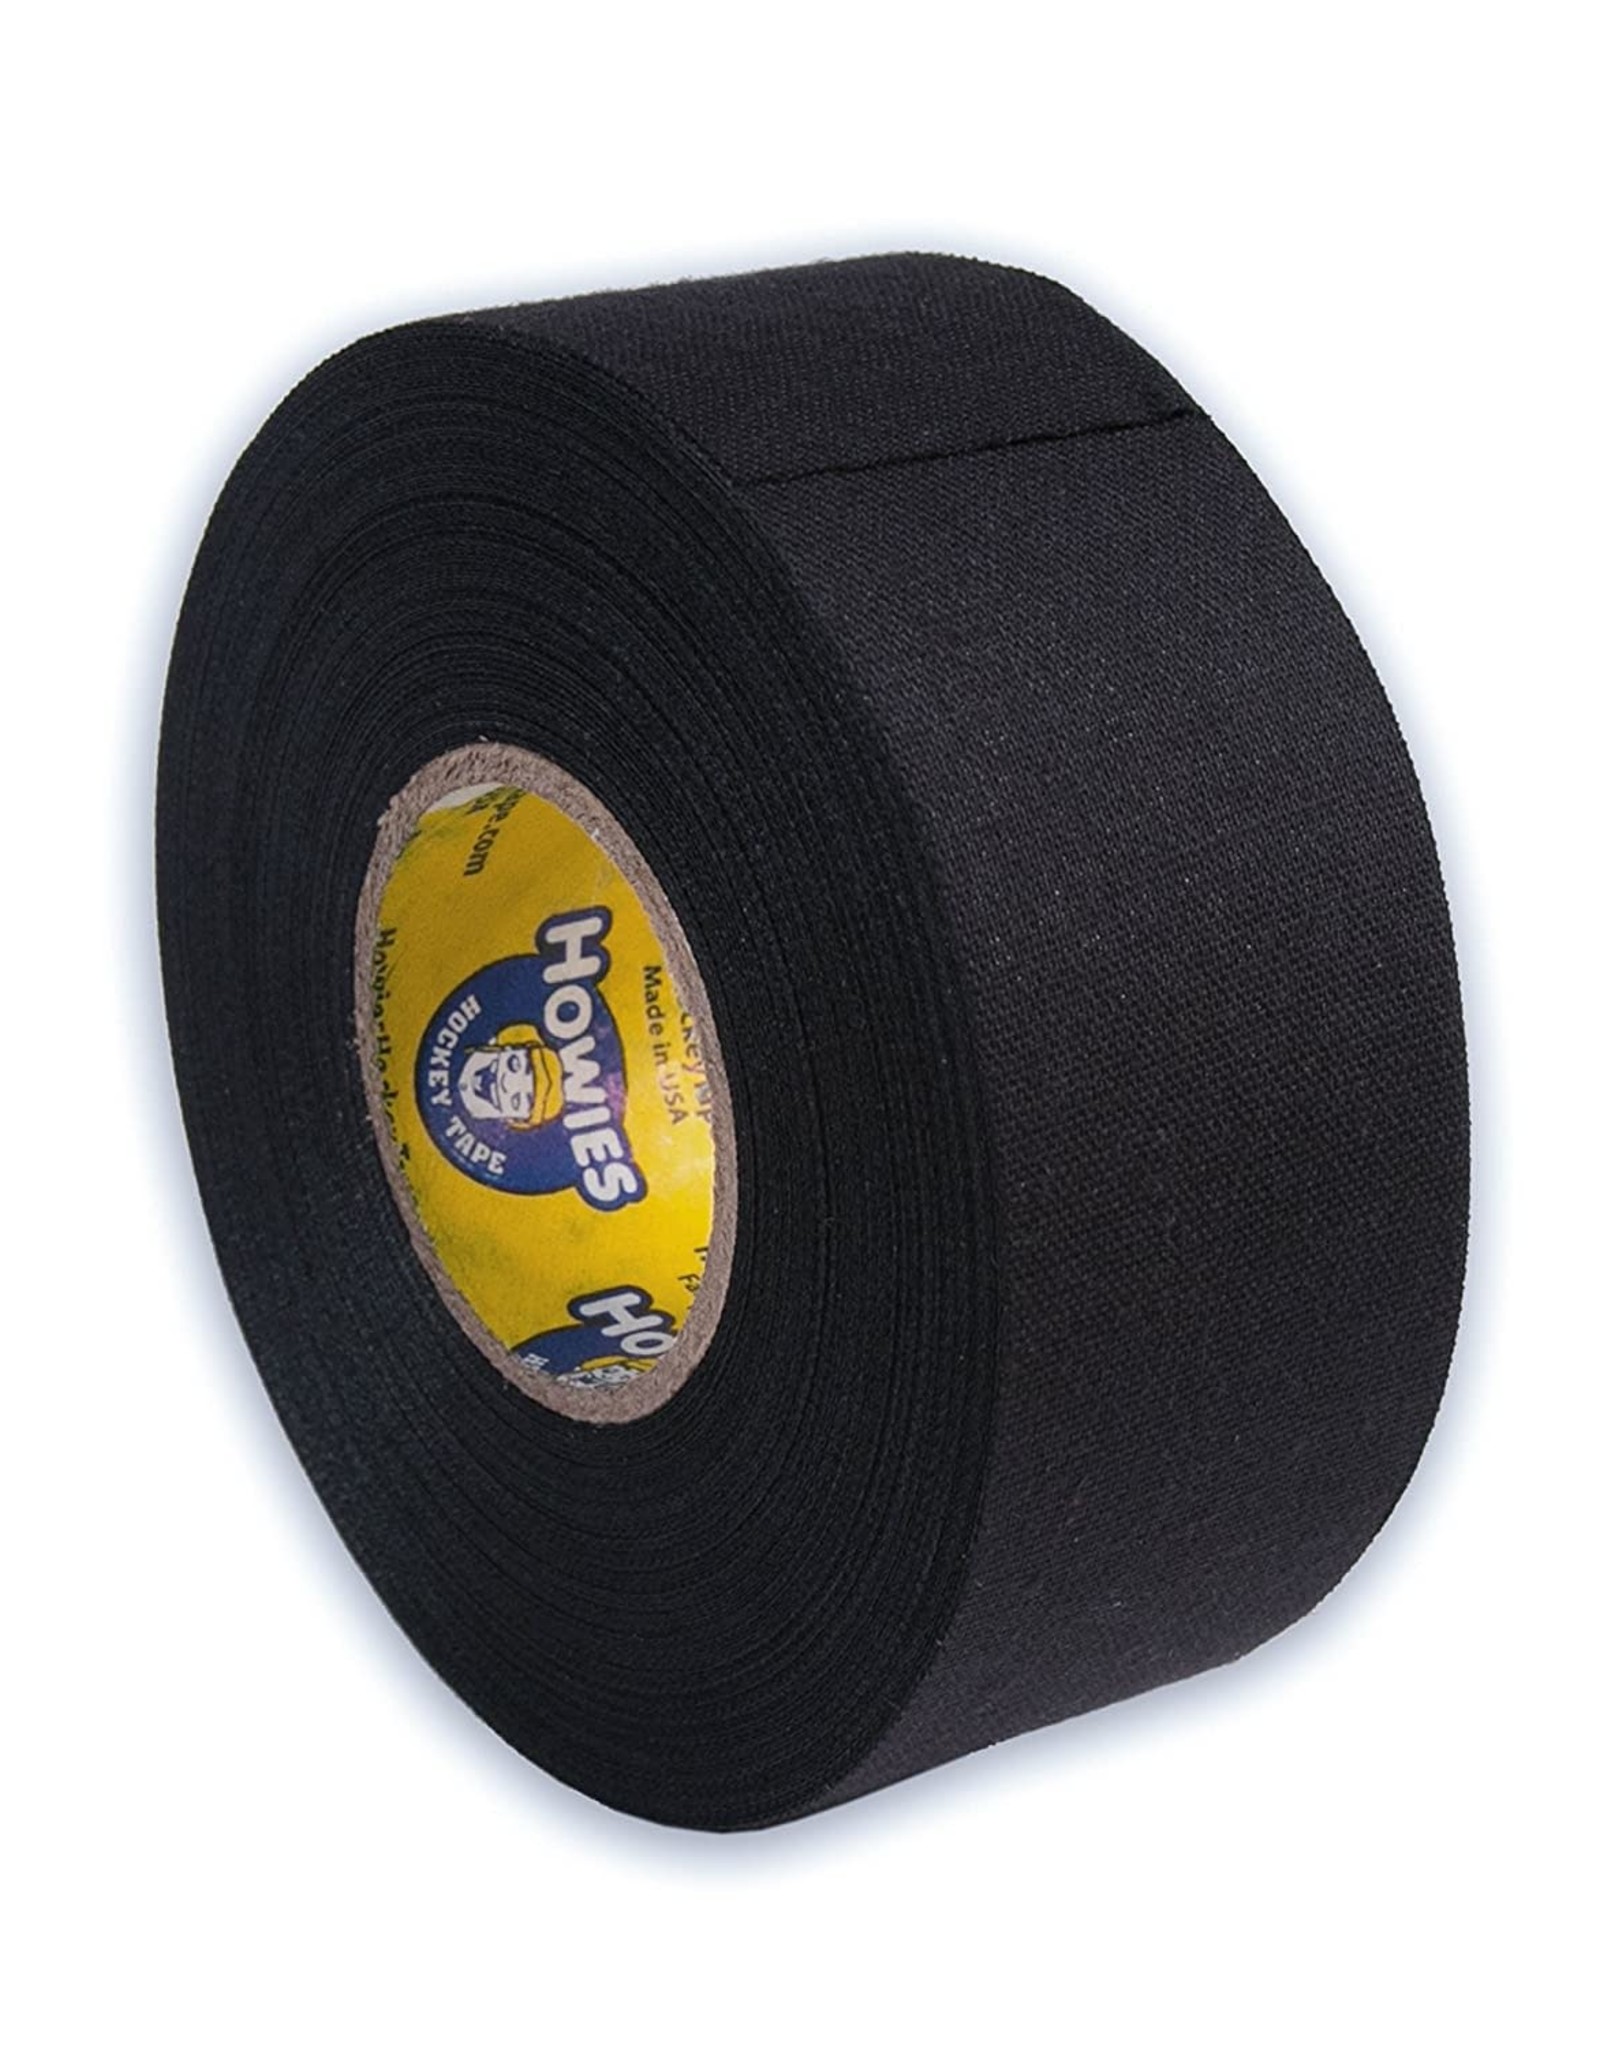 Howies Black 1.5 Cloth Tape - Total Game Plan (TGP) Sports